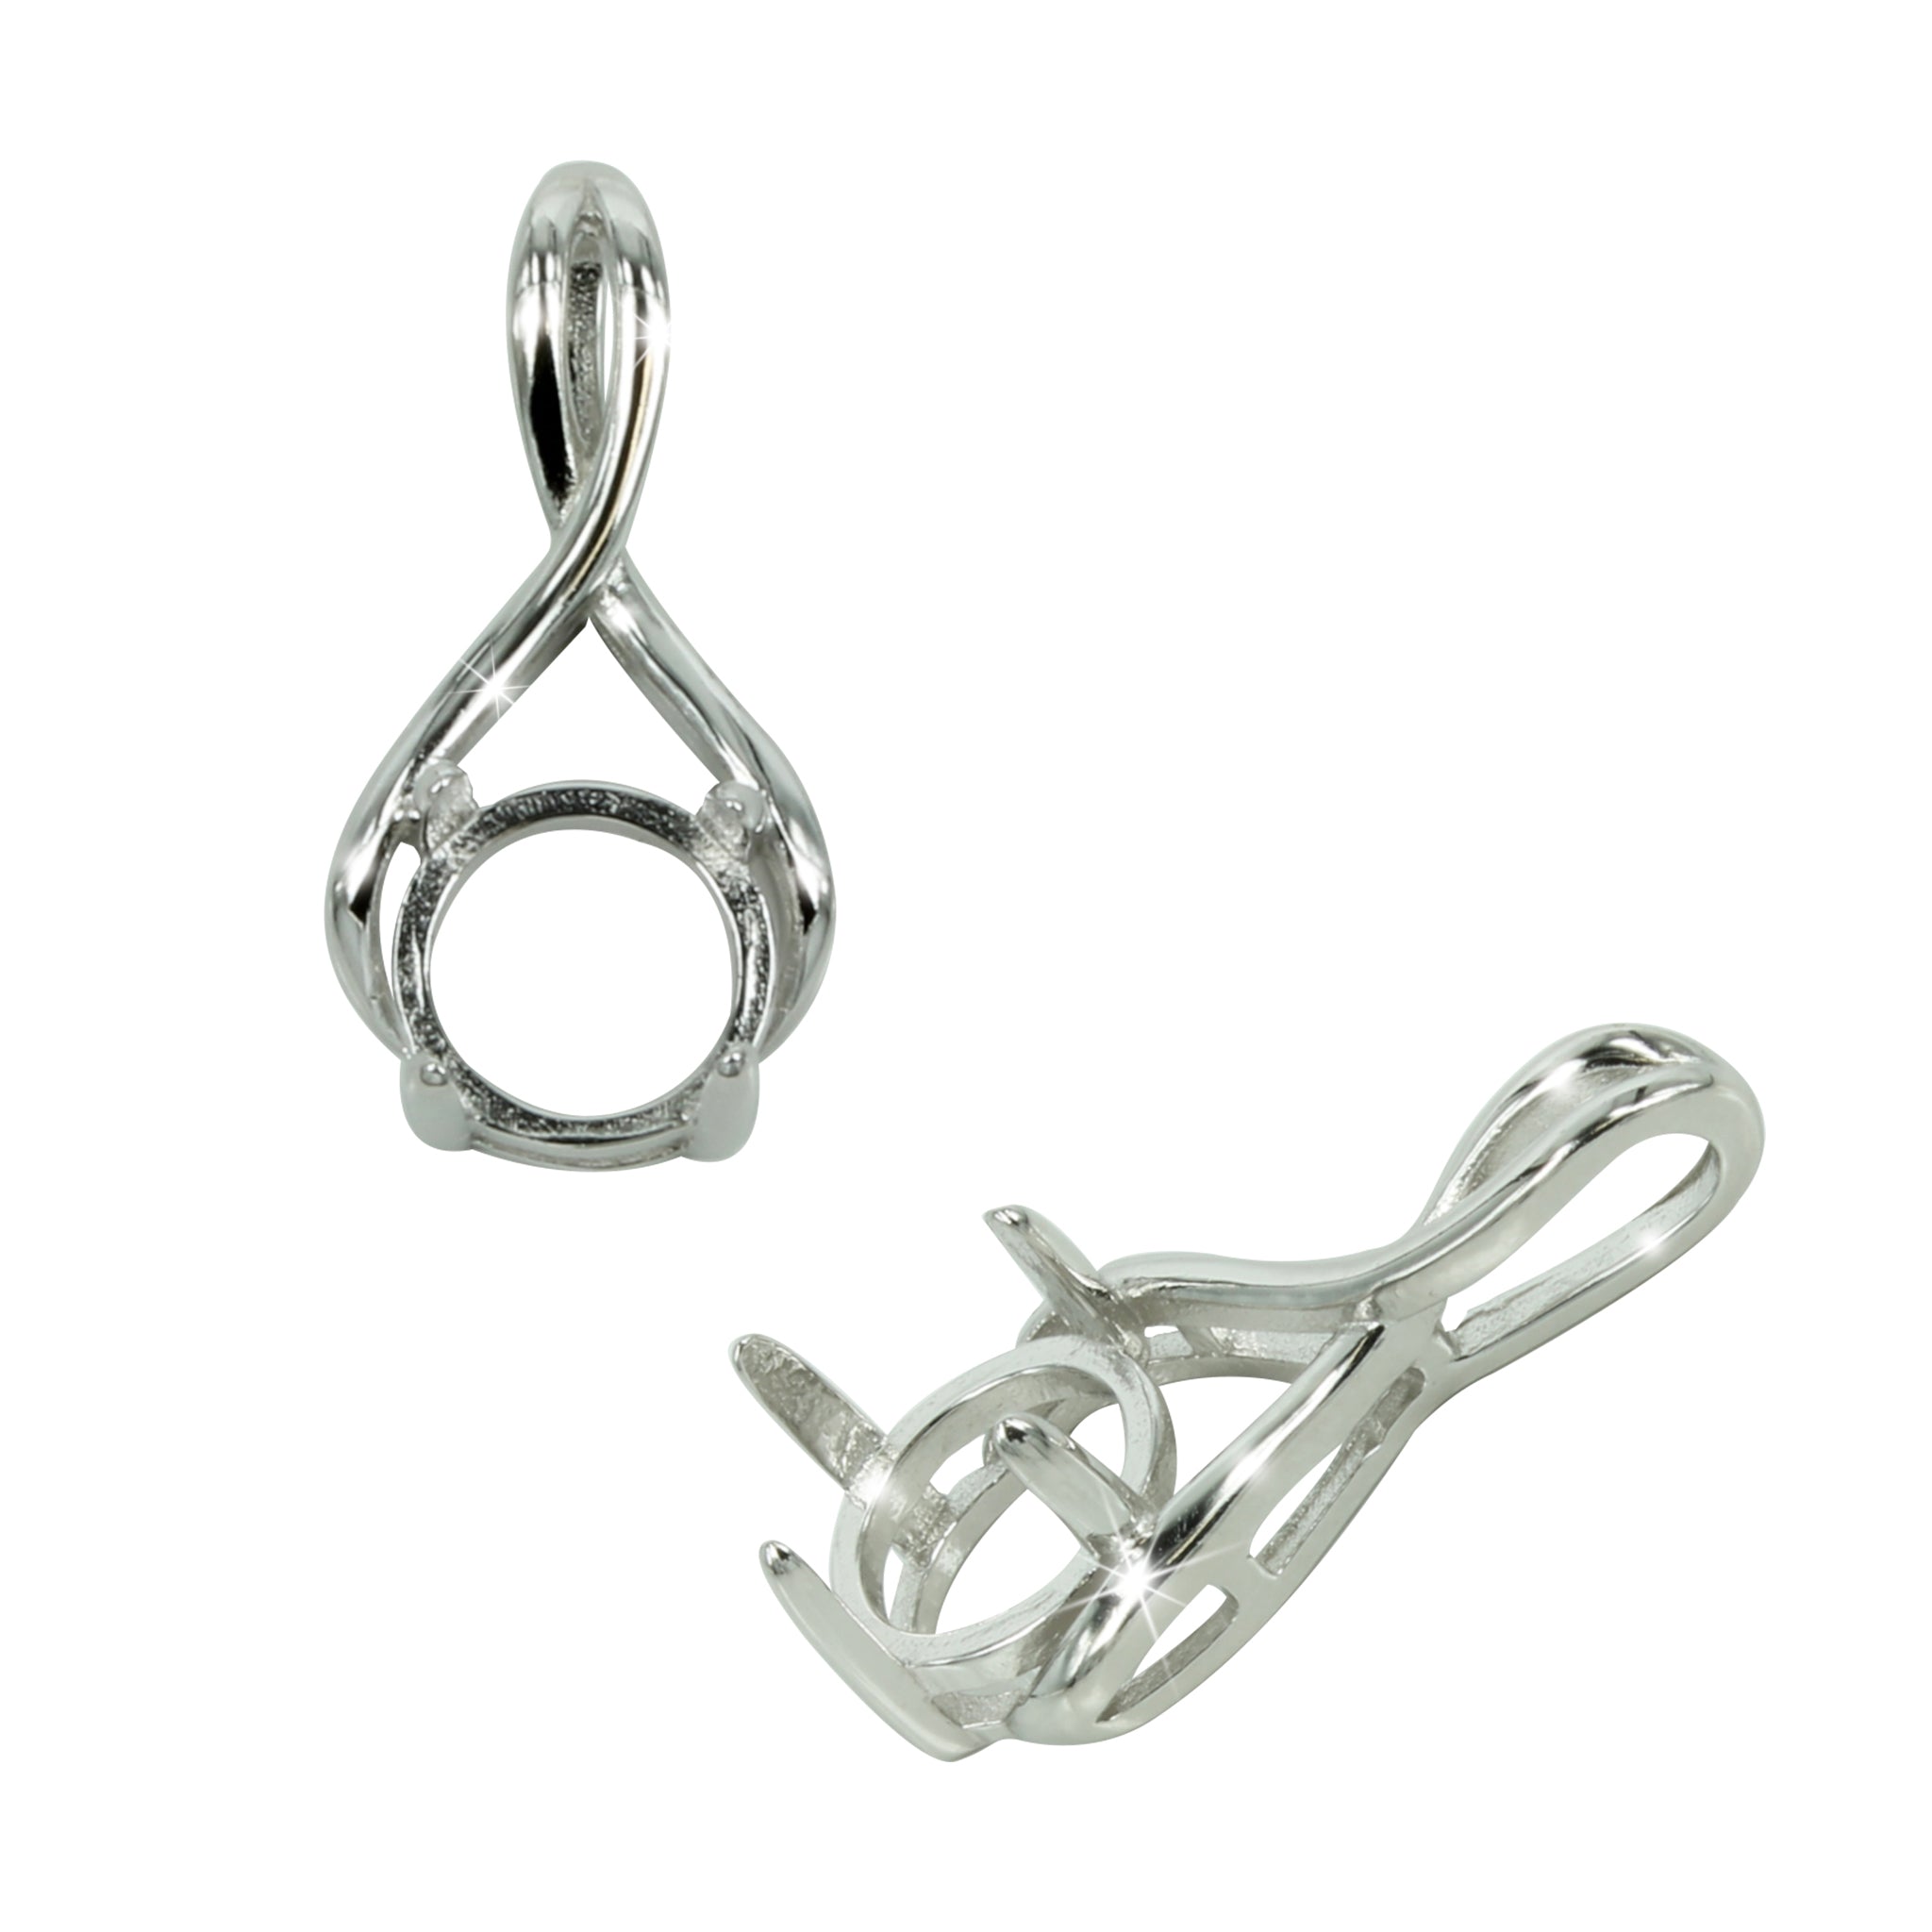 Crossover curves pendant in sterling silver with incorporated bail for 8mm Stones